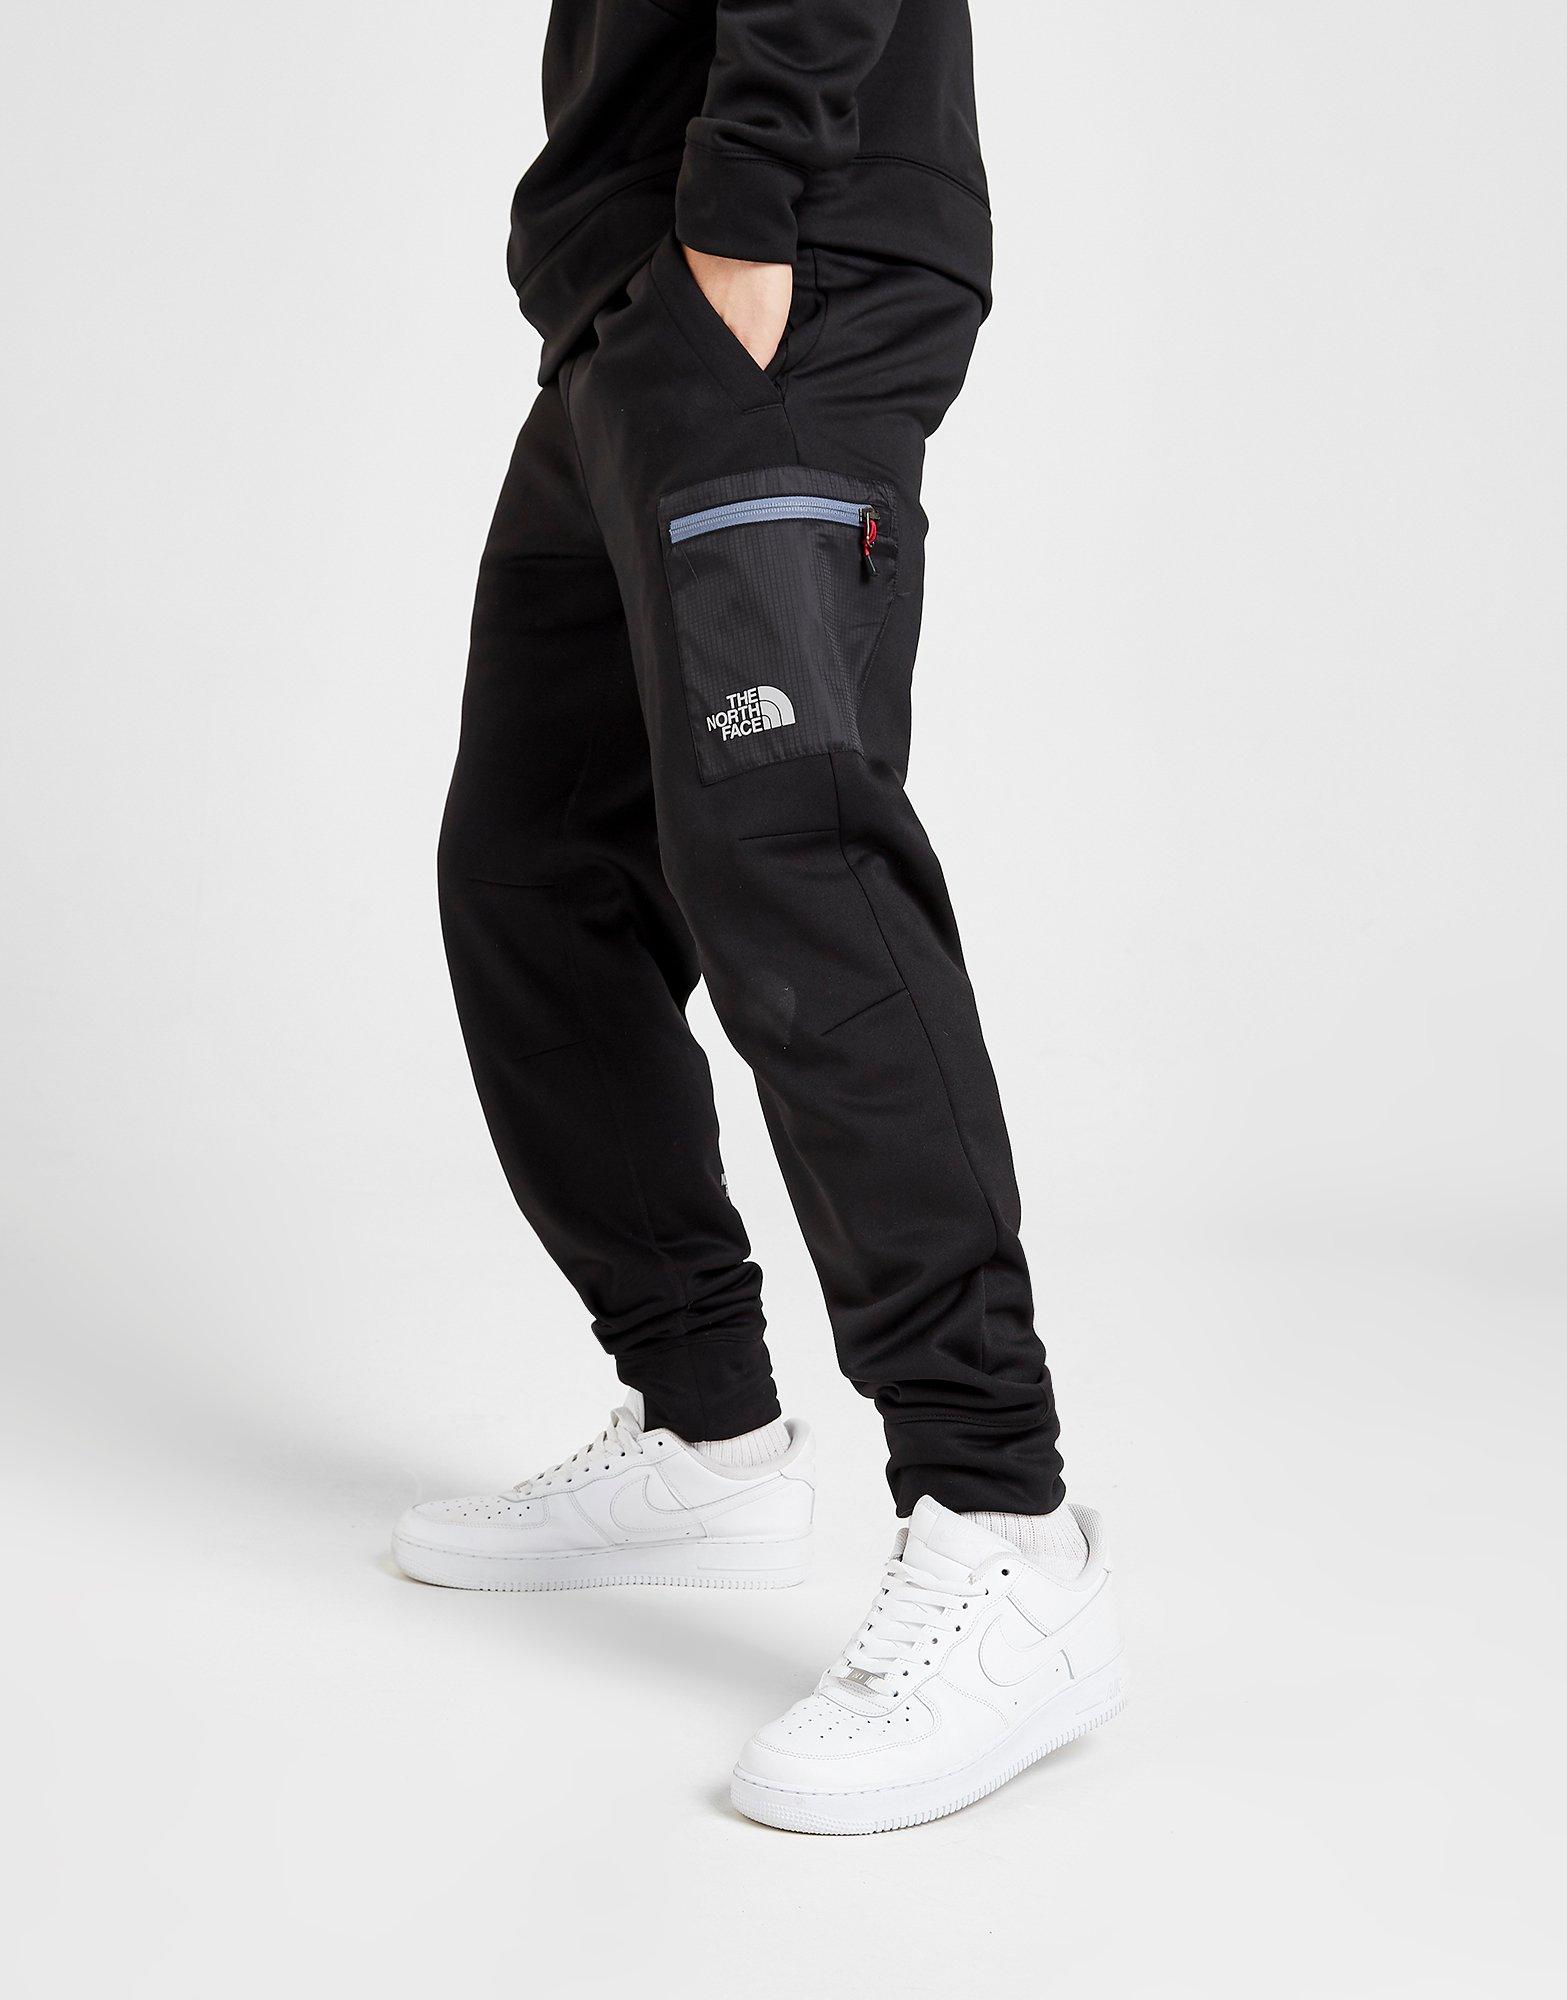 north face black tracksuit bottoms